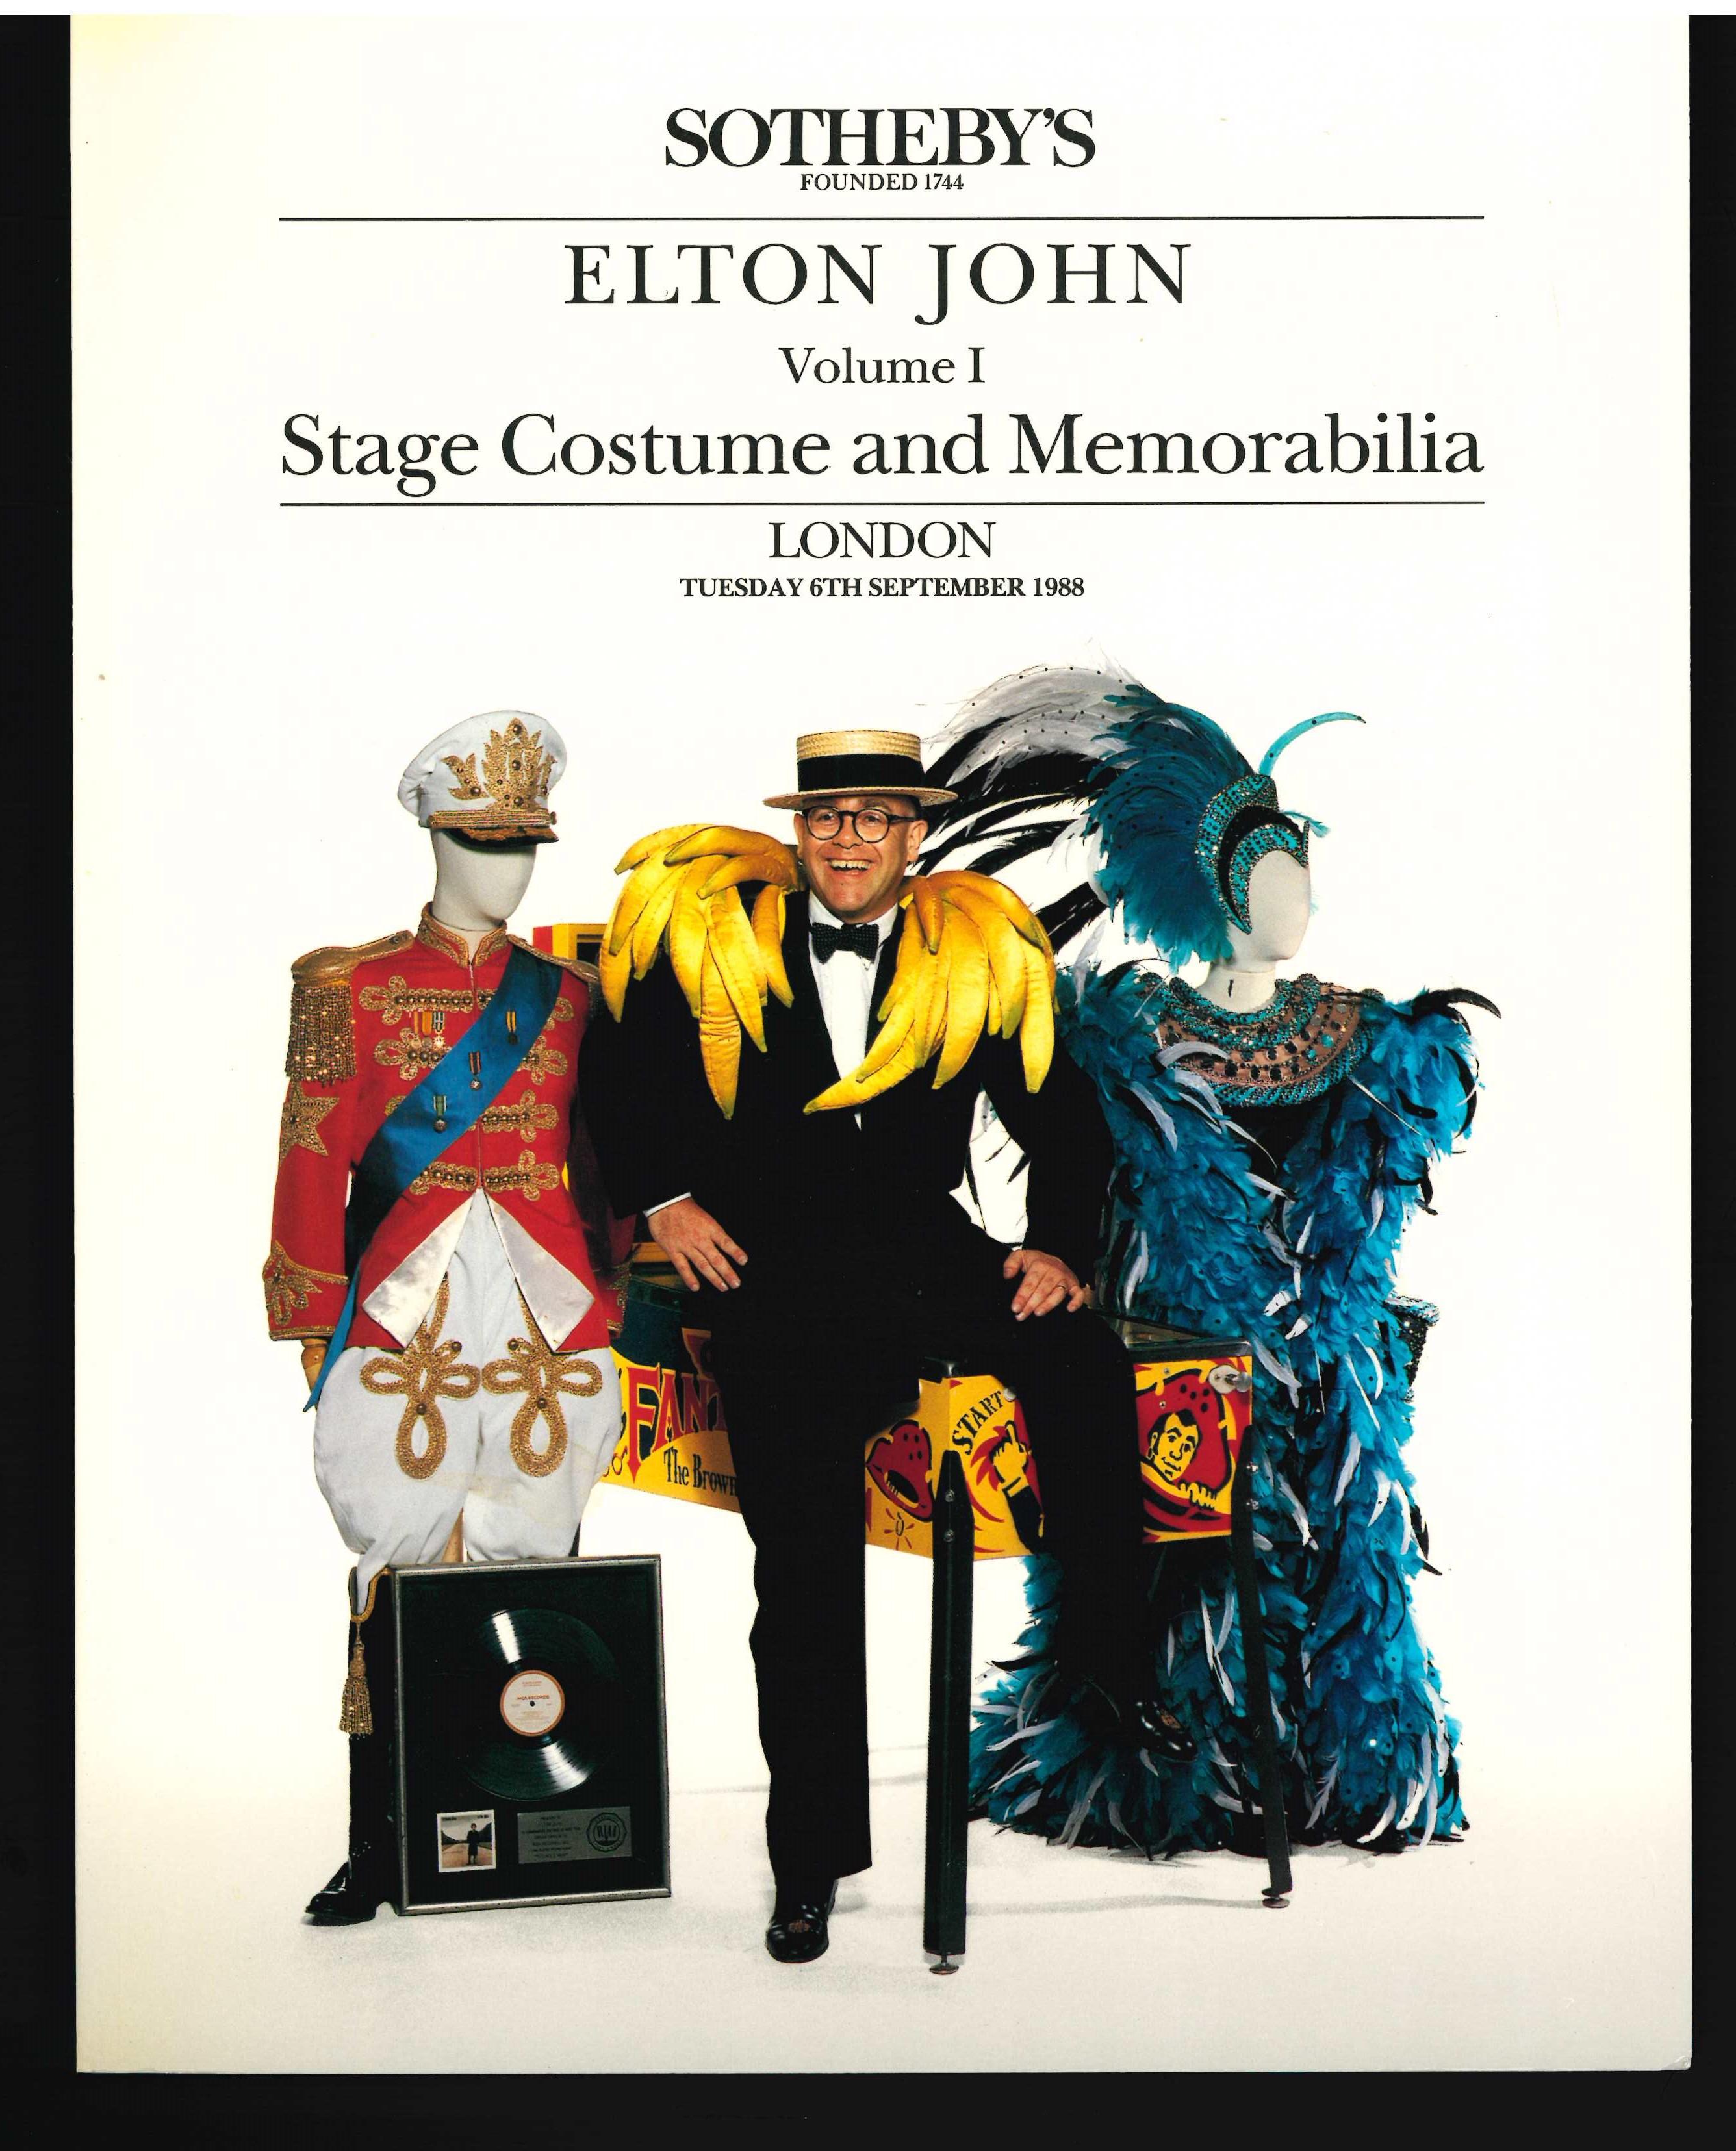 This is the 4 volume set of sales catalogues produced by Sotheby's for the Elton John sale in 1988. The collection is amazing and the stage costumes and glasses are probably as expected, the rest of the items spring a number of surprises with its